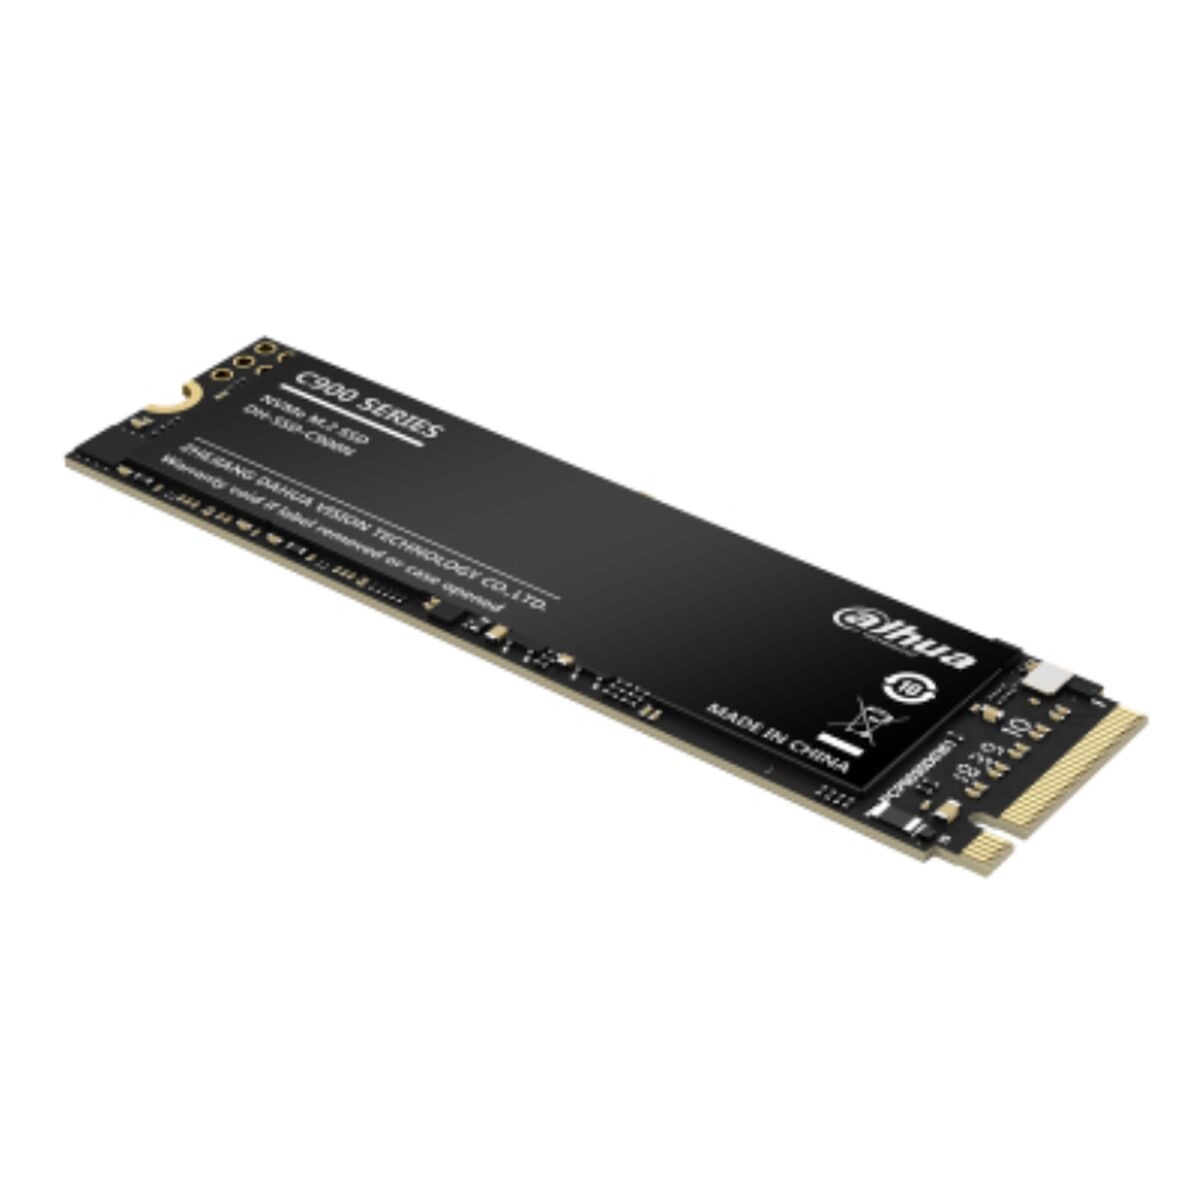 Hard Drive DAHUA TECHNOLOGY DHI-SSD-C900N128G 128 GB, DAHUA TECHNOLOGY, Computing, Data storage, hard-drive-dahua-technology-dhi-ssd-c900n128g-128-gb, Brand_DAHUA TECHNOLOGY, category-reference-2609, category-reference-2803, category-reference-2806, category-reference-t-19685, category-reference-t-19909, category-reference-t-21357, category-reference-t-25638, computers / components, Condition_NEW, Price_20 - 50, Teleworking, RiotNook